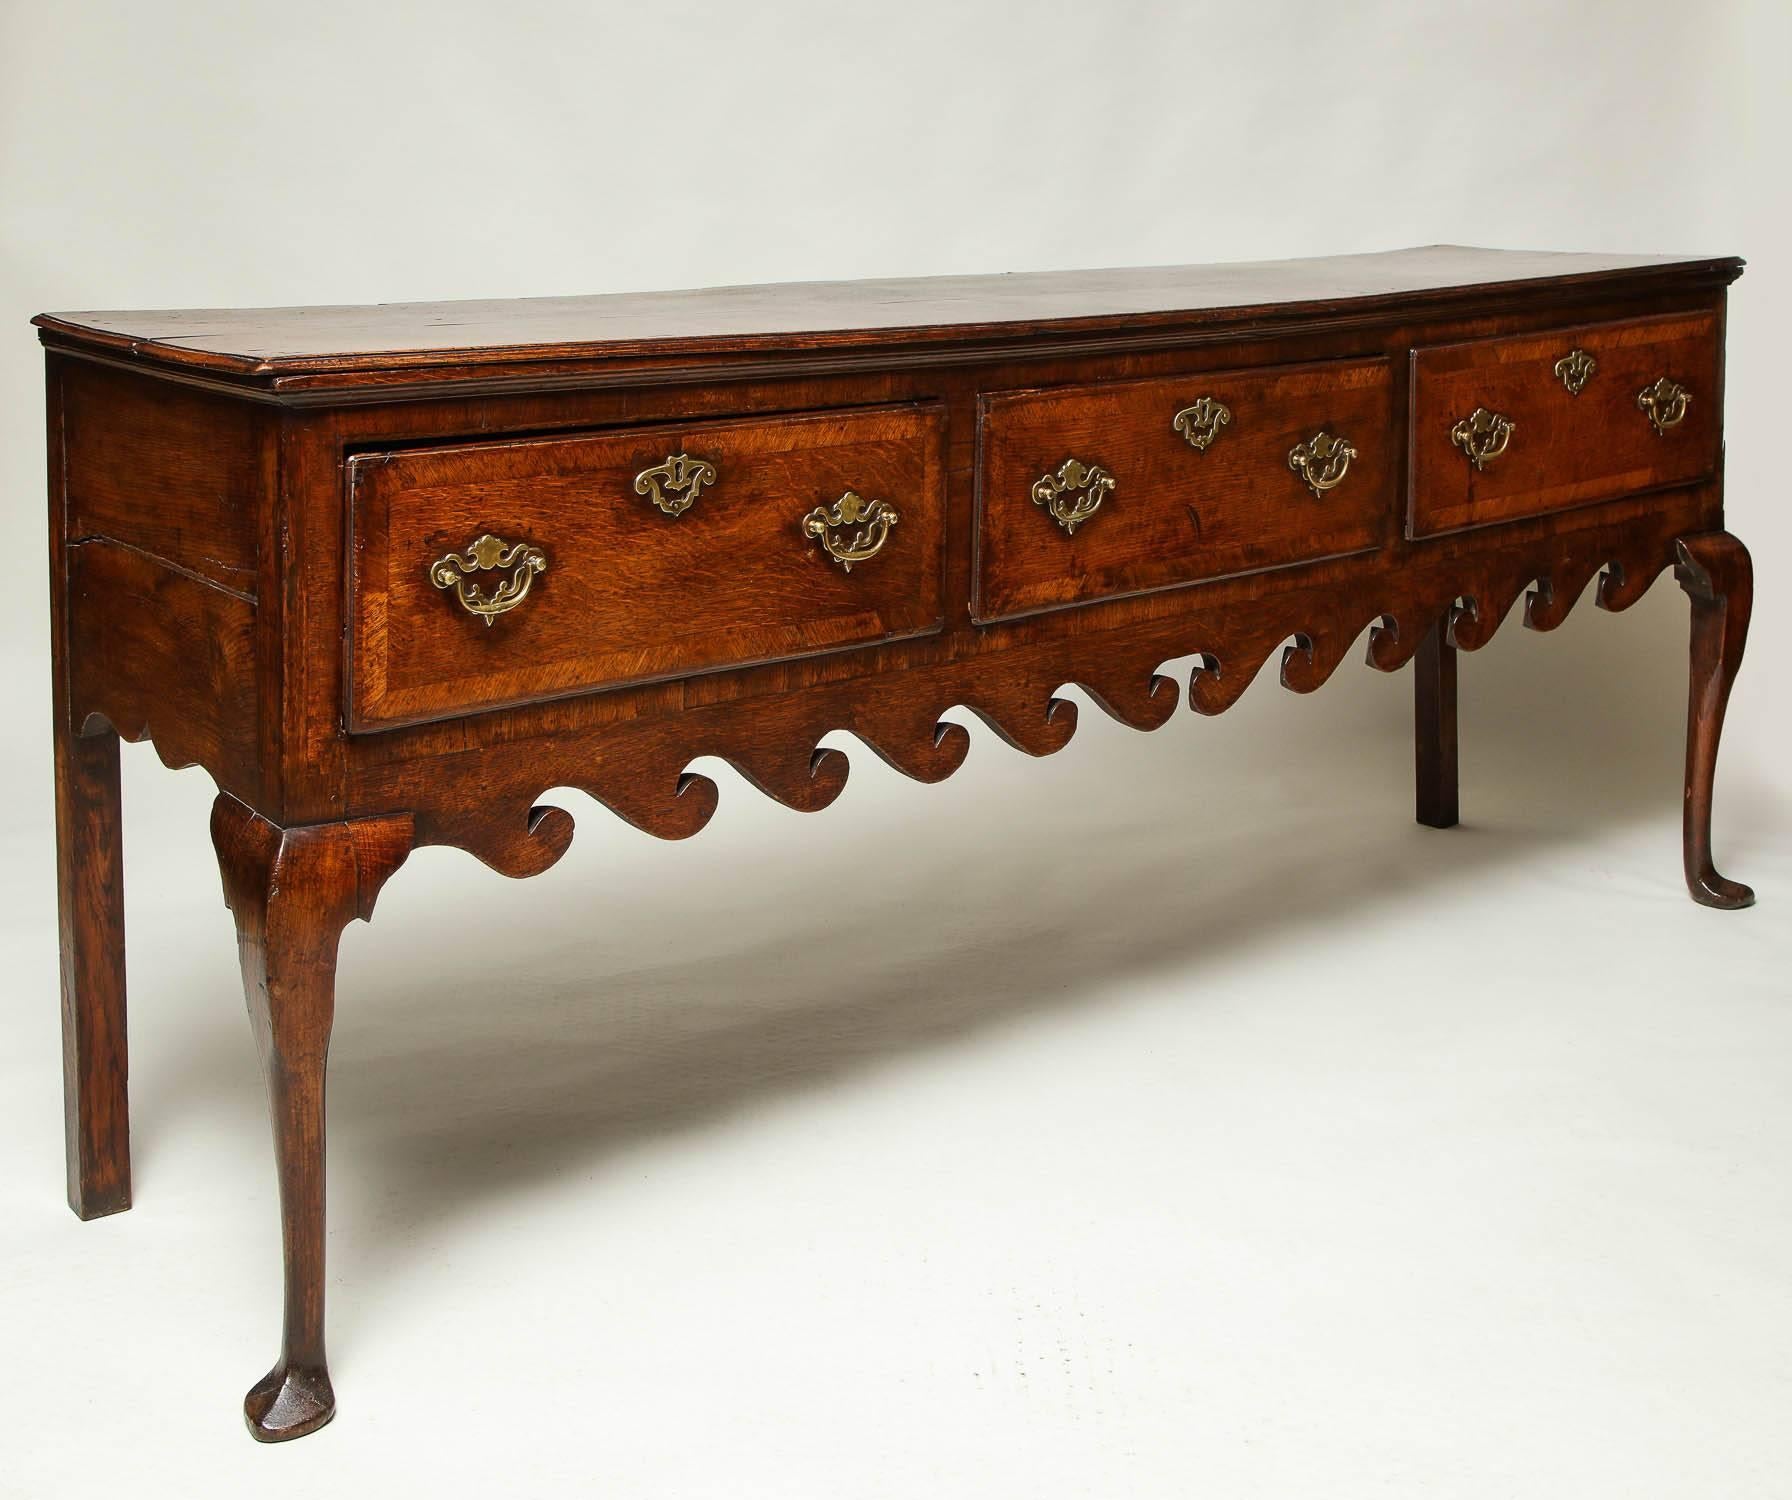 A fine George III English oak low dresser or server with three mahogany cross banded drawers standing on cabriole front legs with slipper feet, over richly scalloped "wave" apron, the whole possessing great rich color and patination.